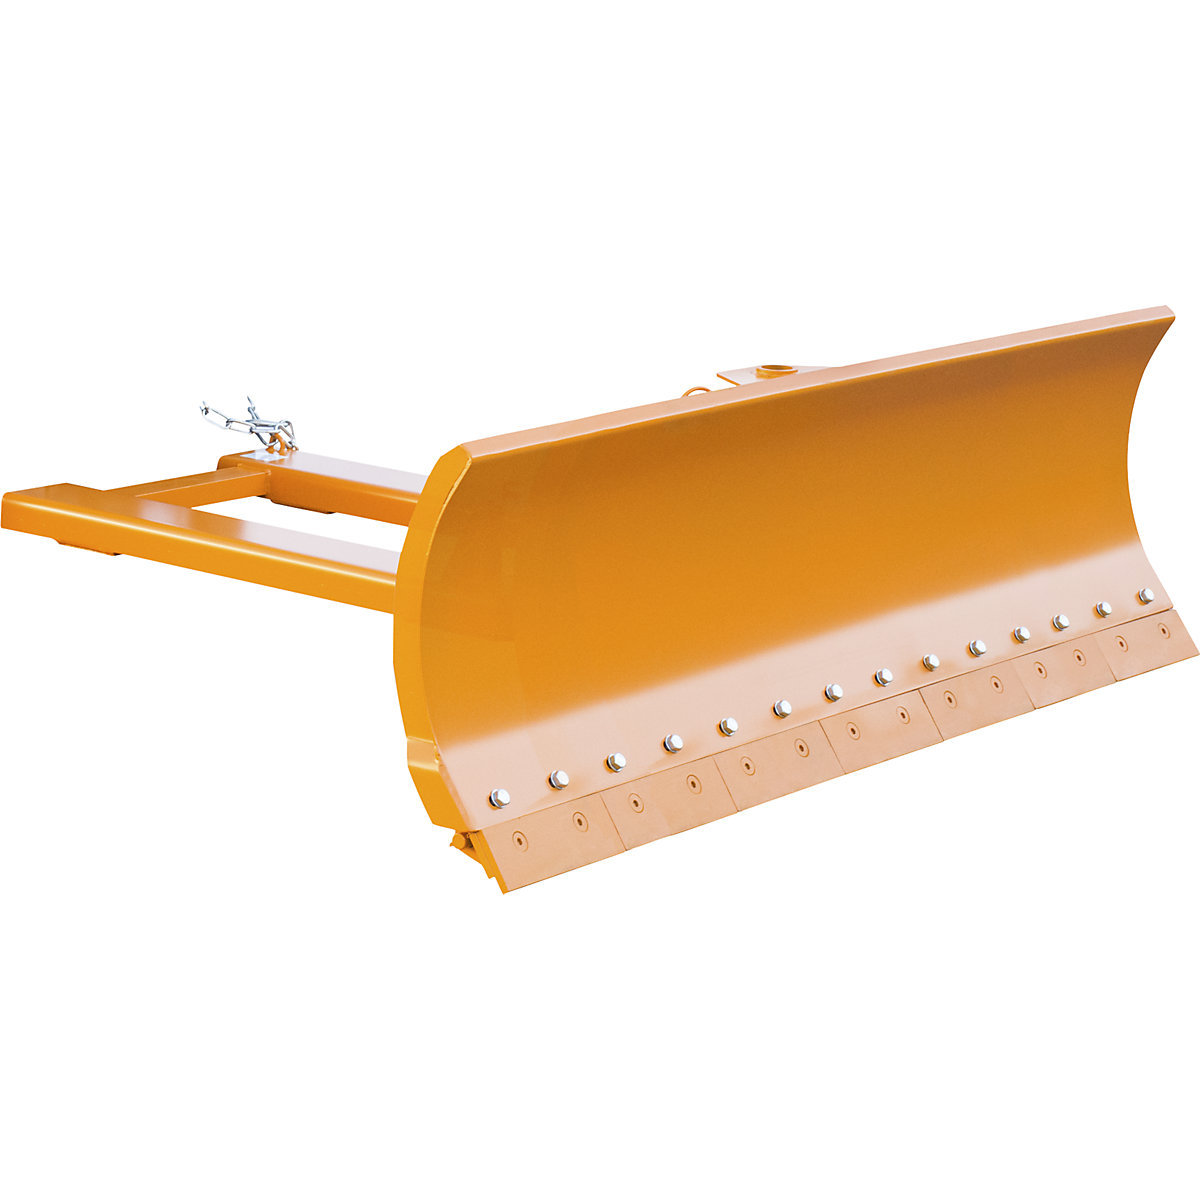 Snow plough for forklifts – eurokraft pro, with spring-loaded blade trims, blade width 2100 mm